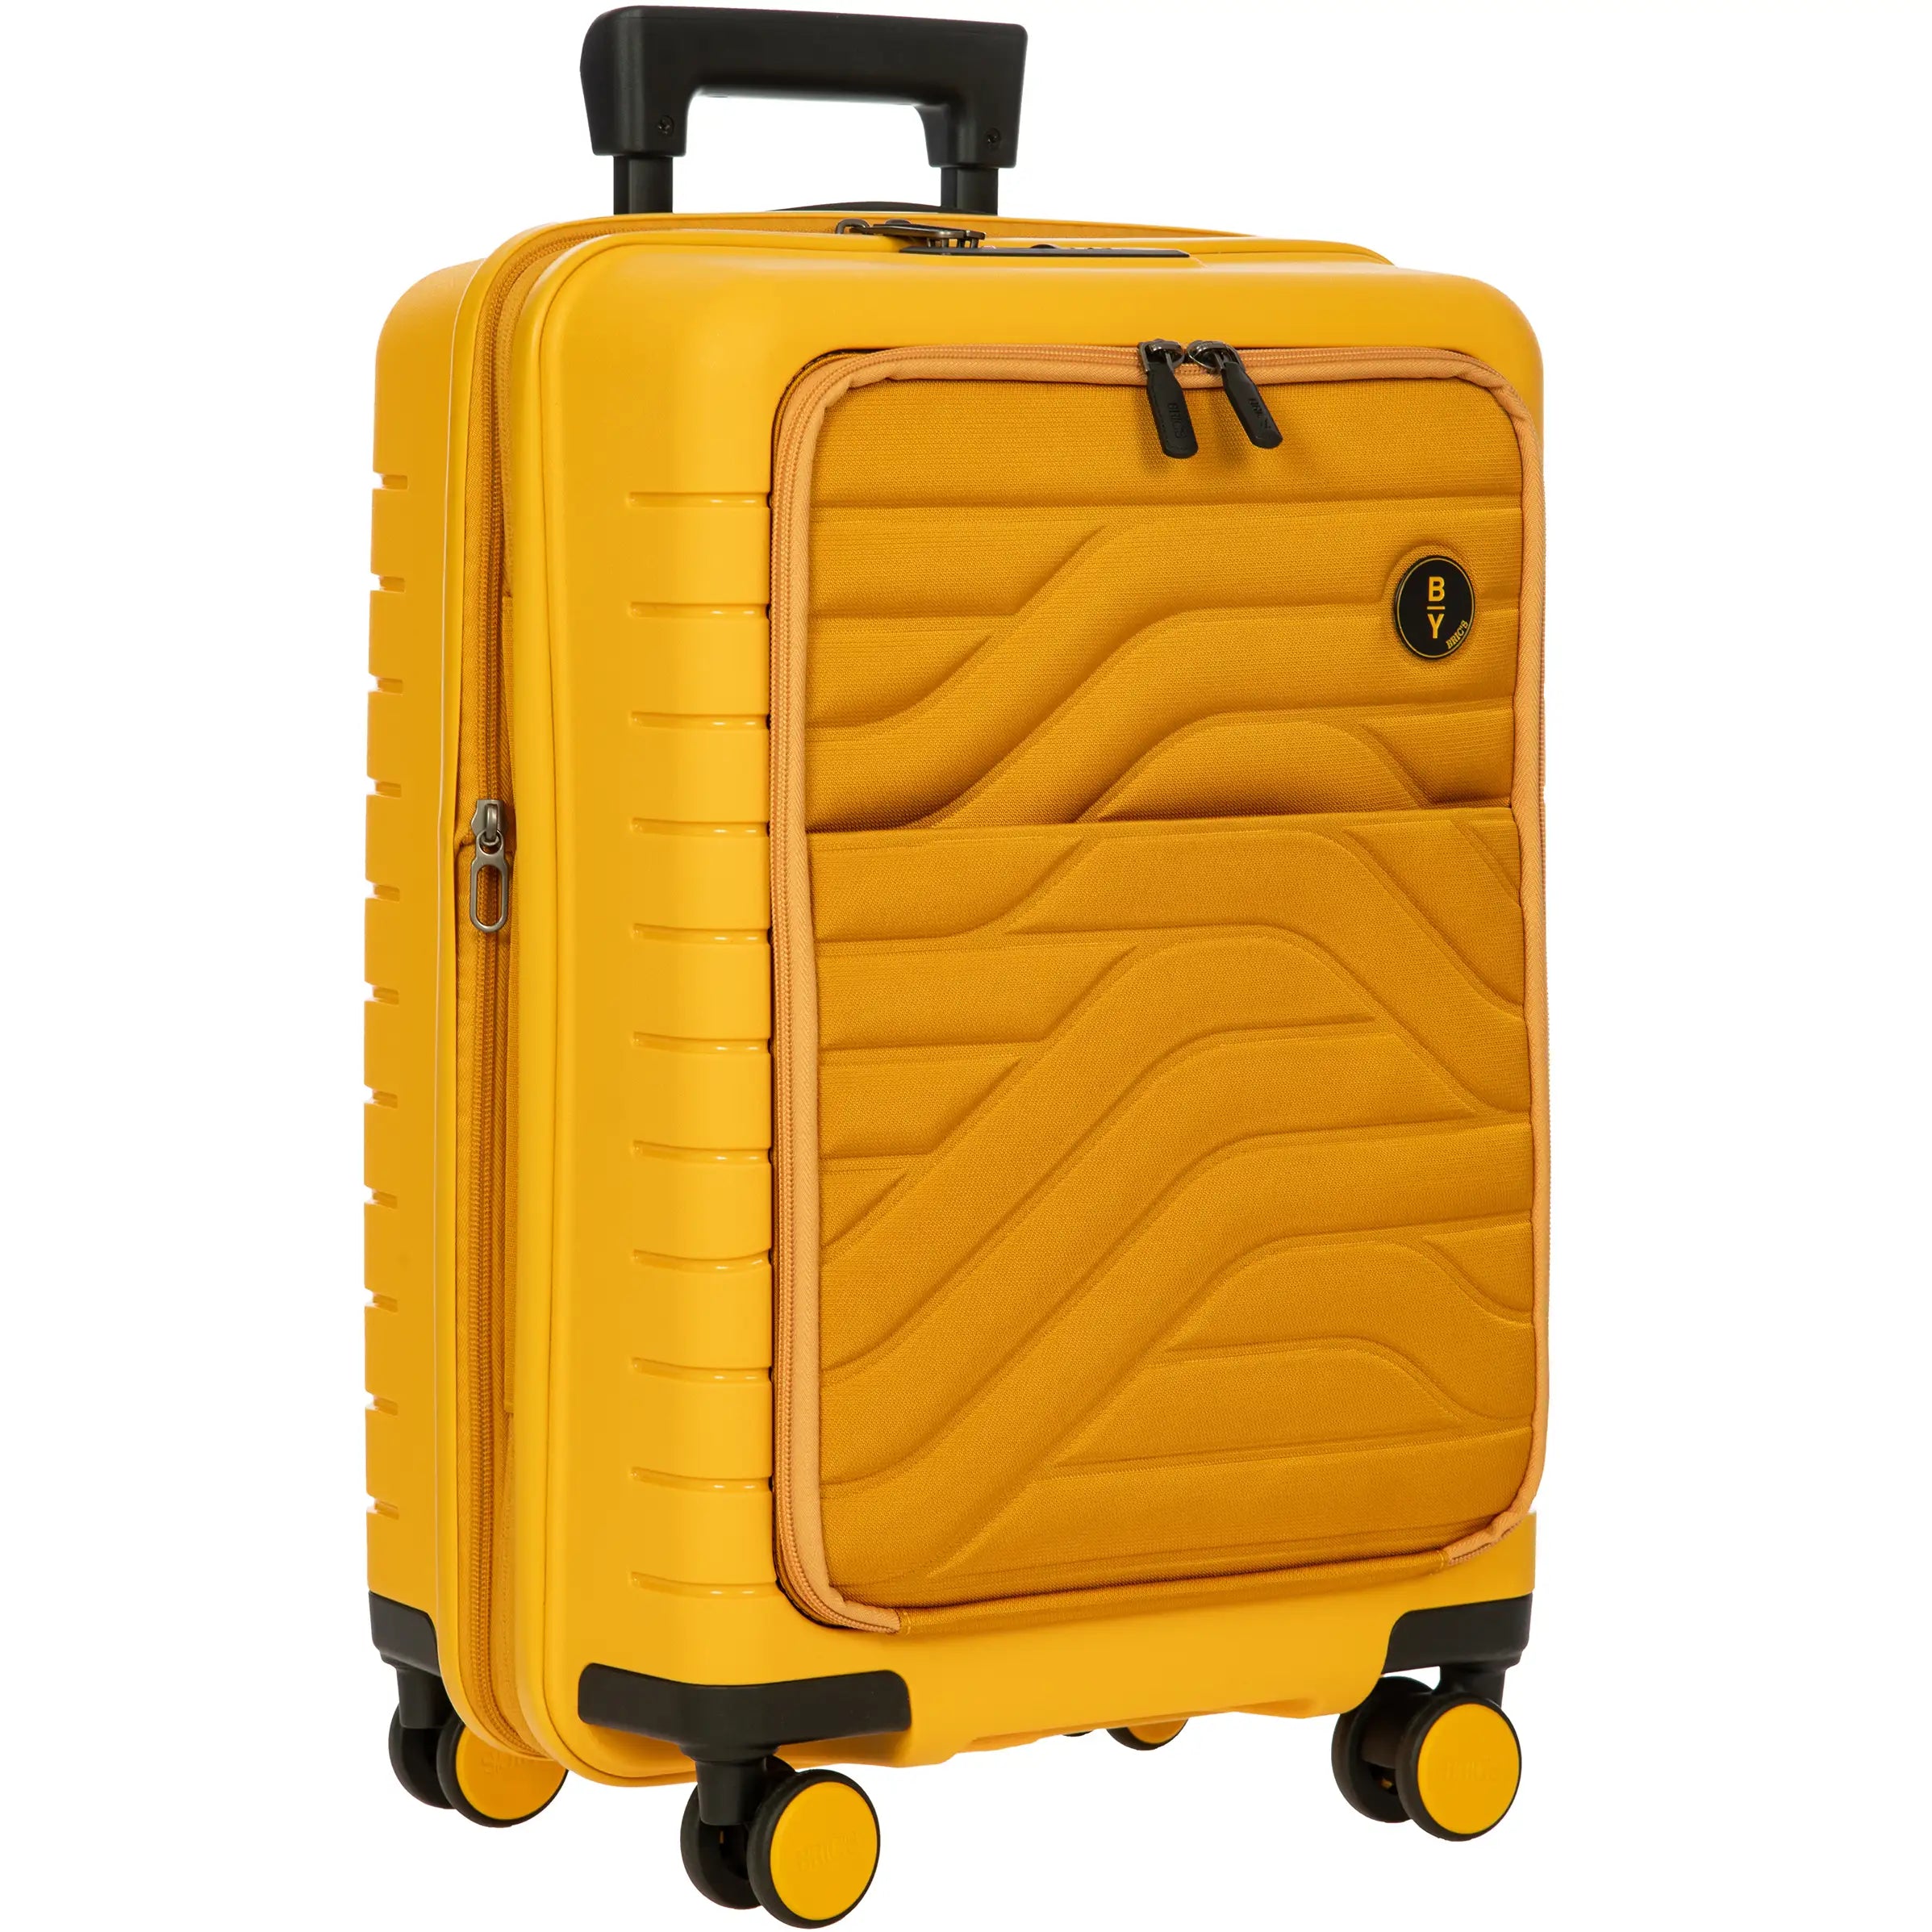 Valise cabine 4 roues By by Brics Ulisse avec poche frontale 55 cm - Mangue